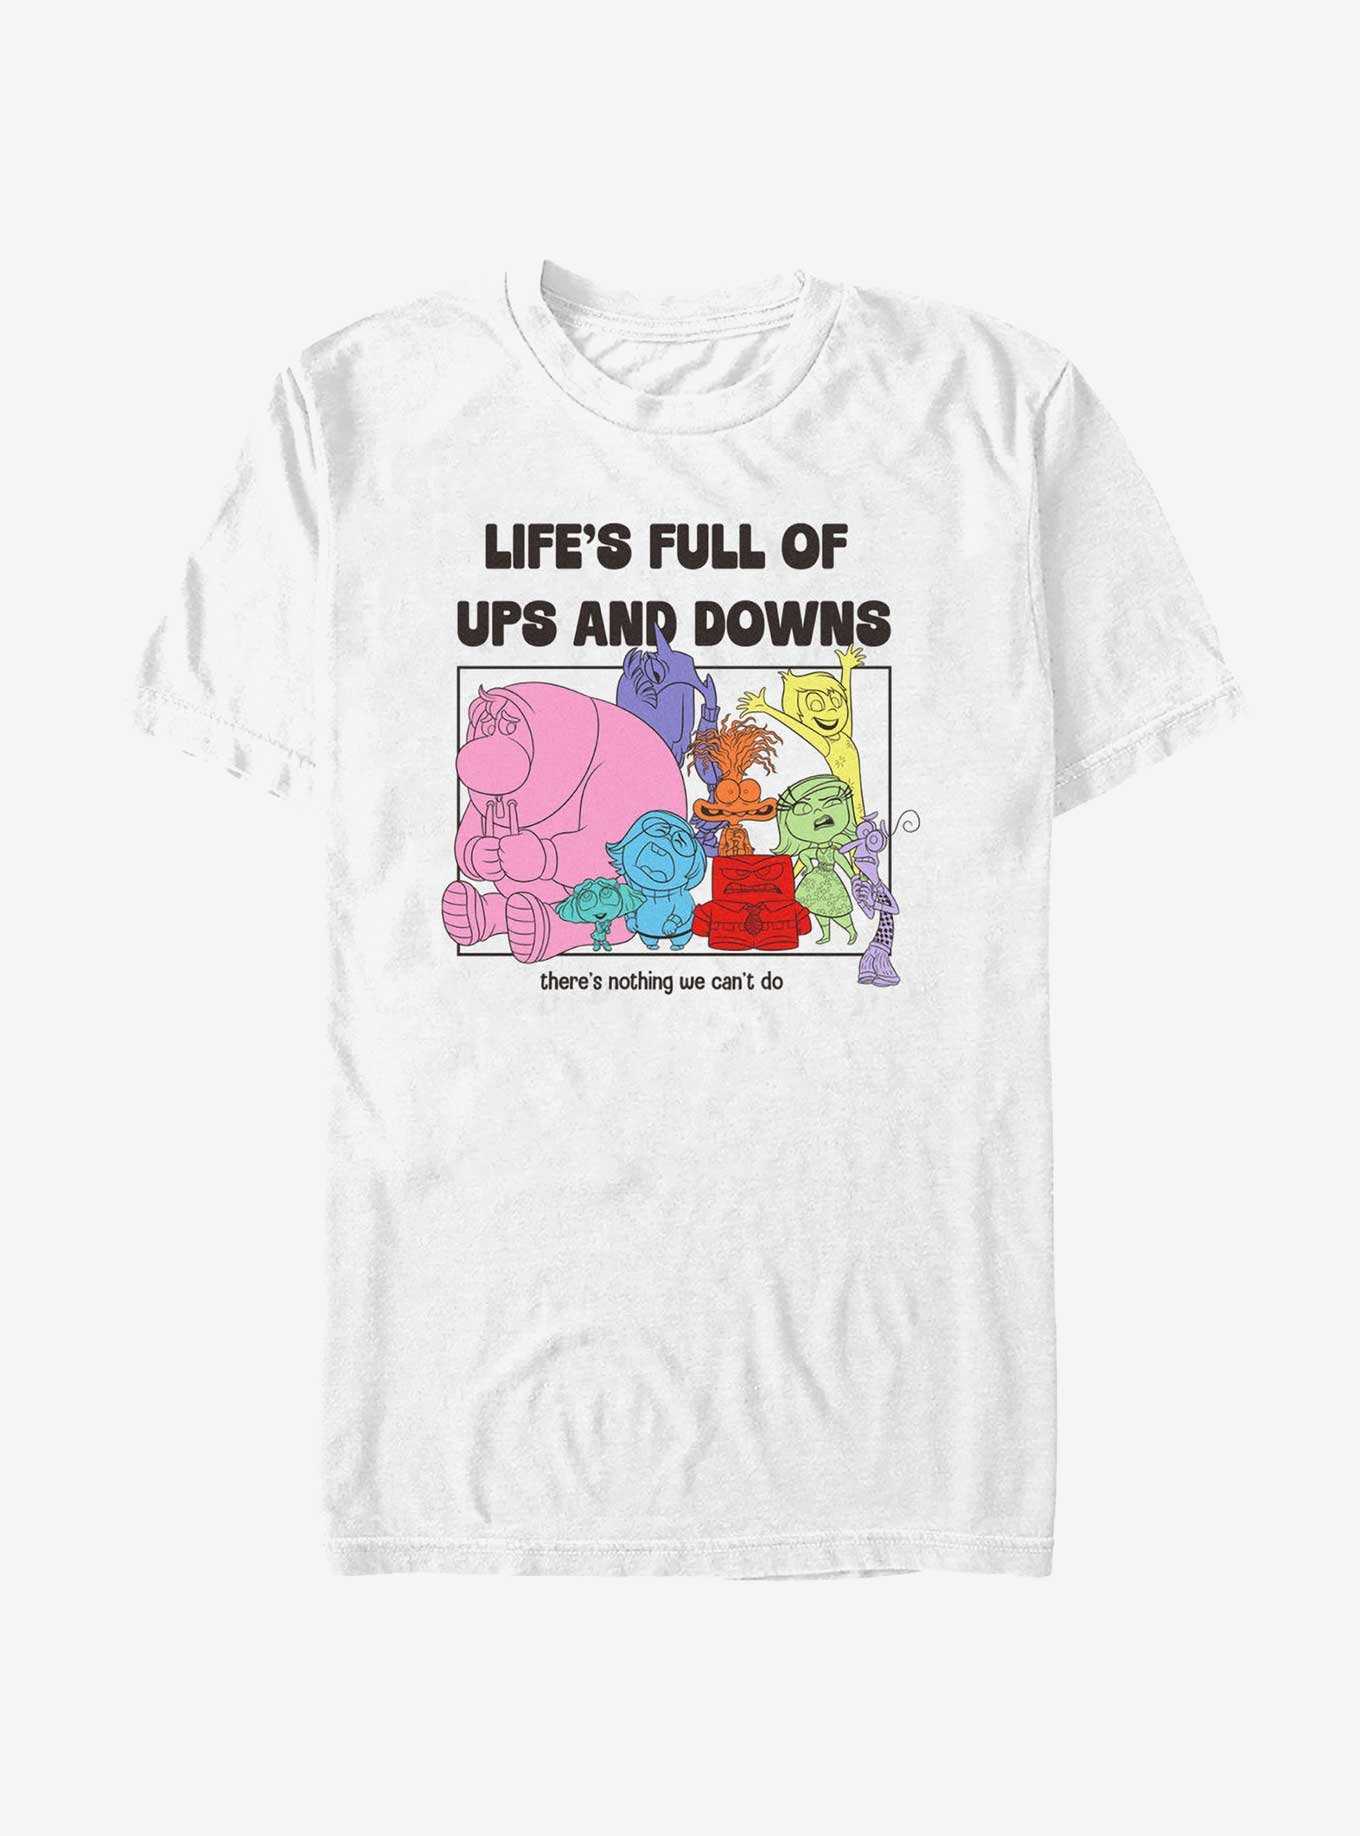 Disney Pixar Inside Out 2 Life's Full Of Ups And Downs T-Shirt, , hi-res